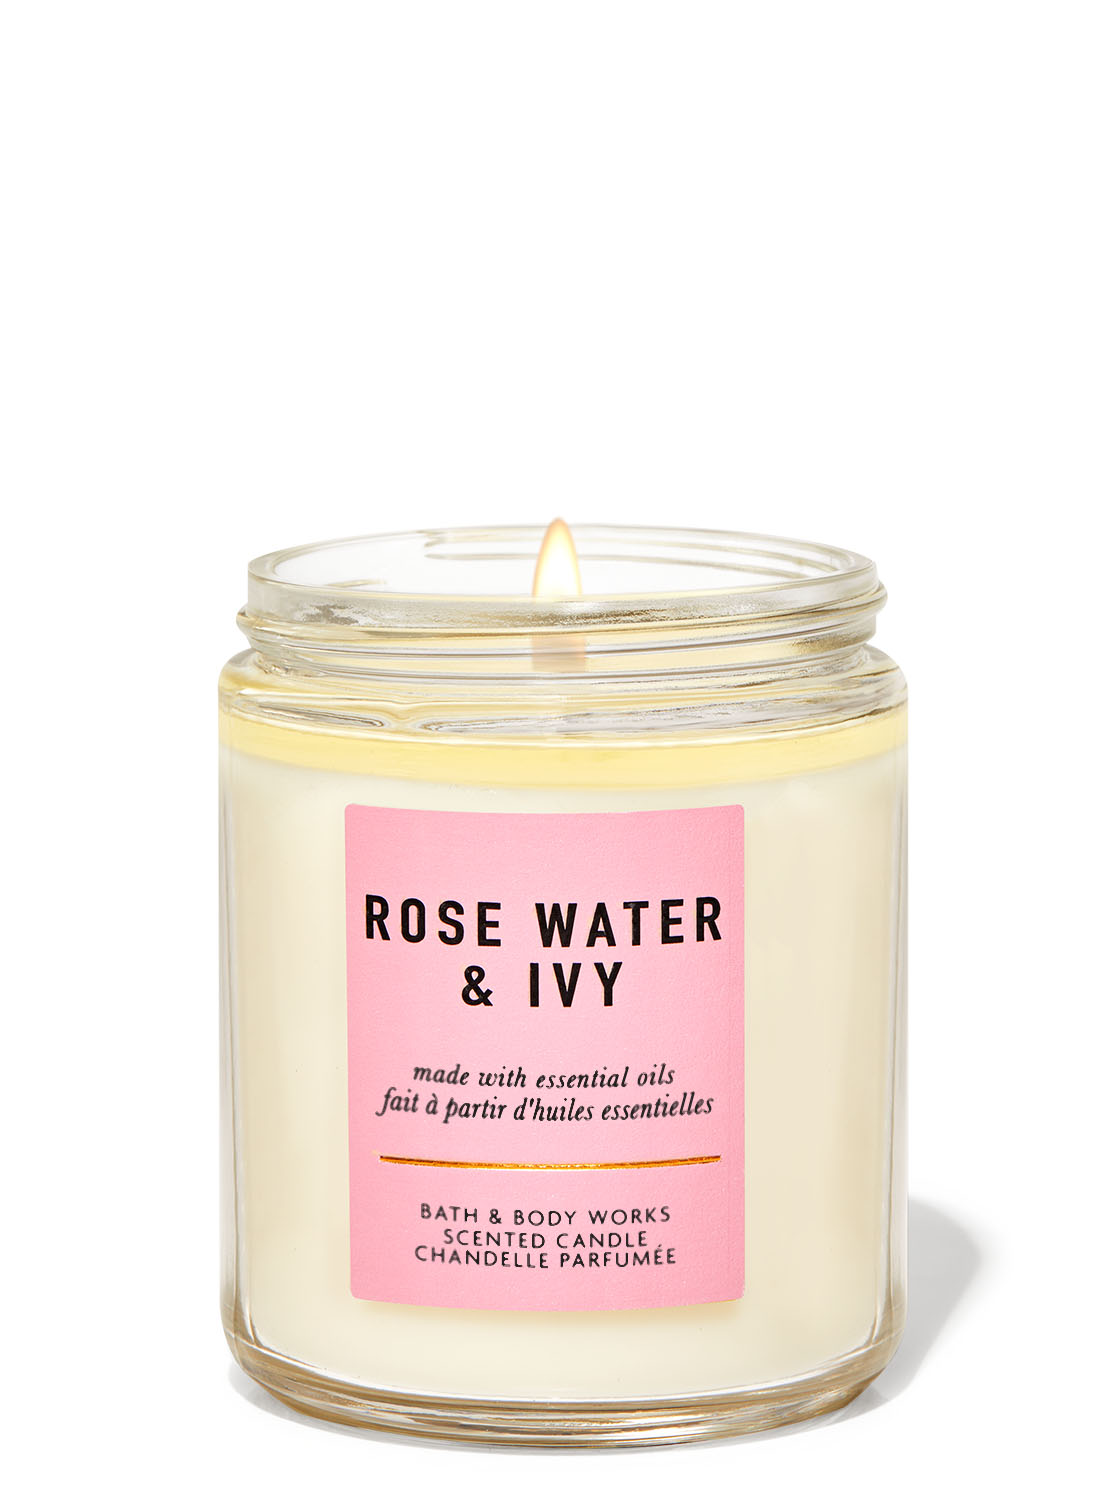 Bath & Body Works ROSE WATER & IVY Large 3-Wick Candle SPRING MUSK 